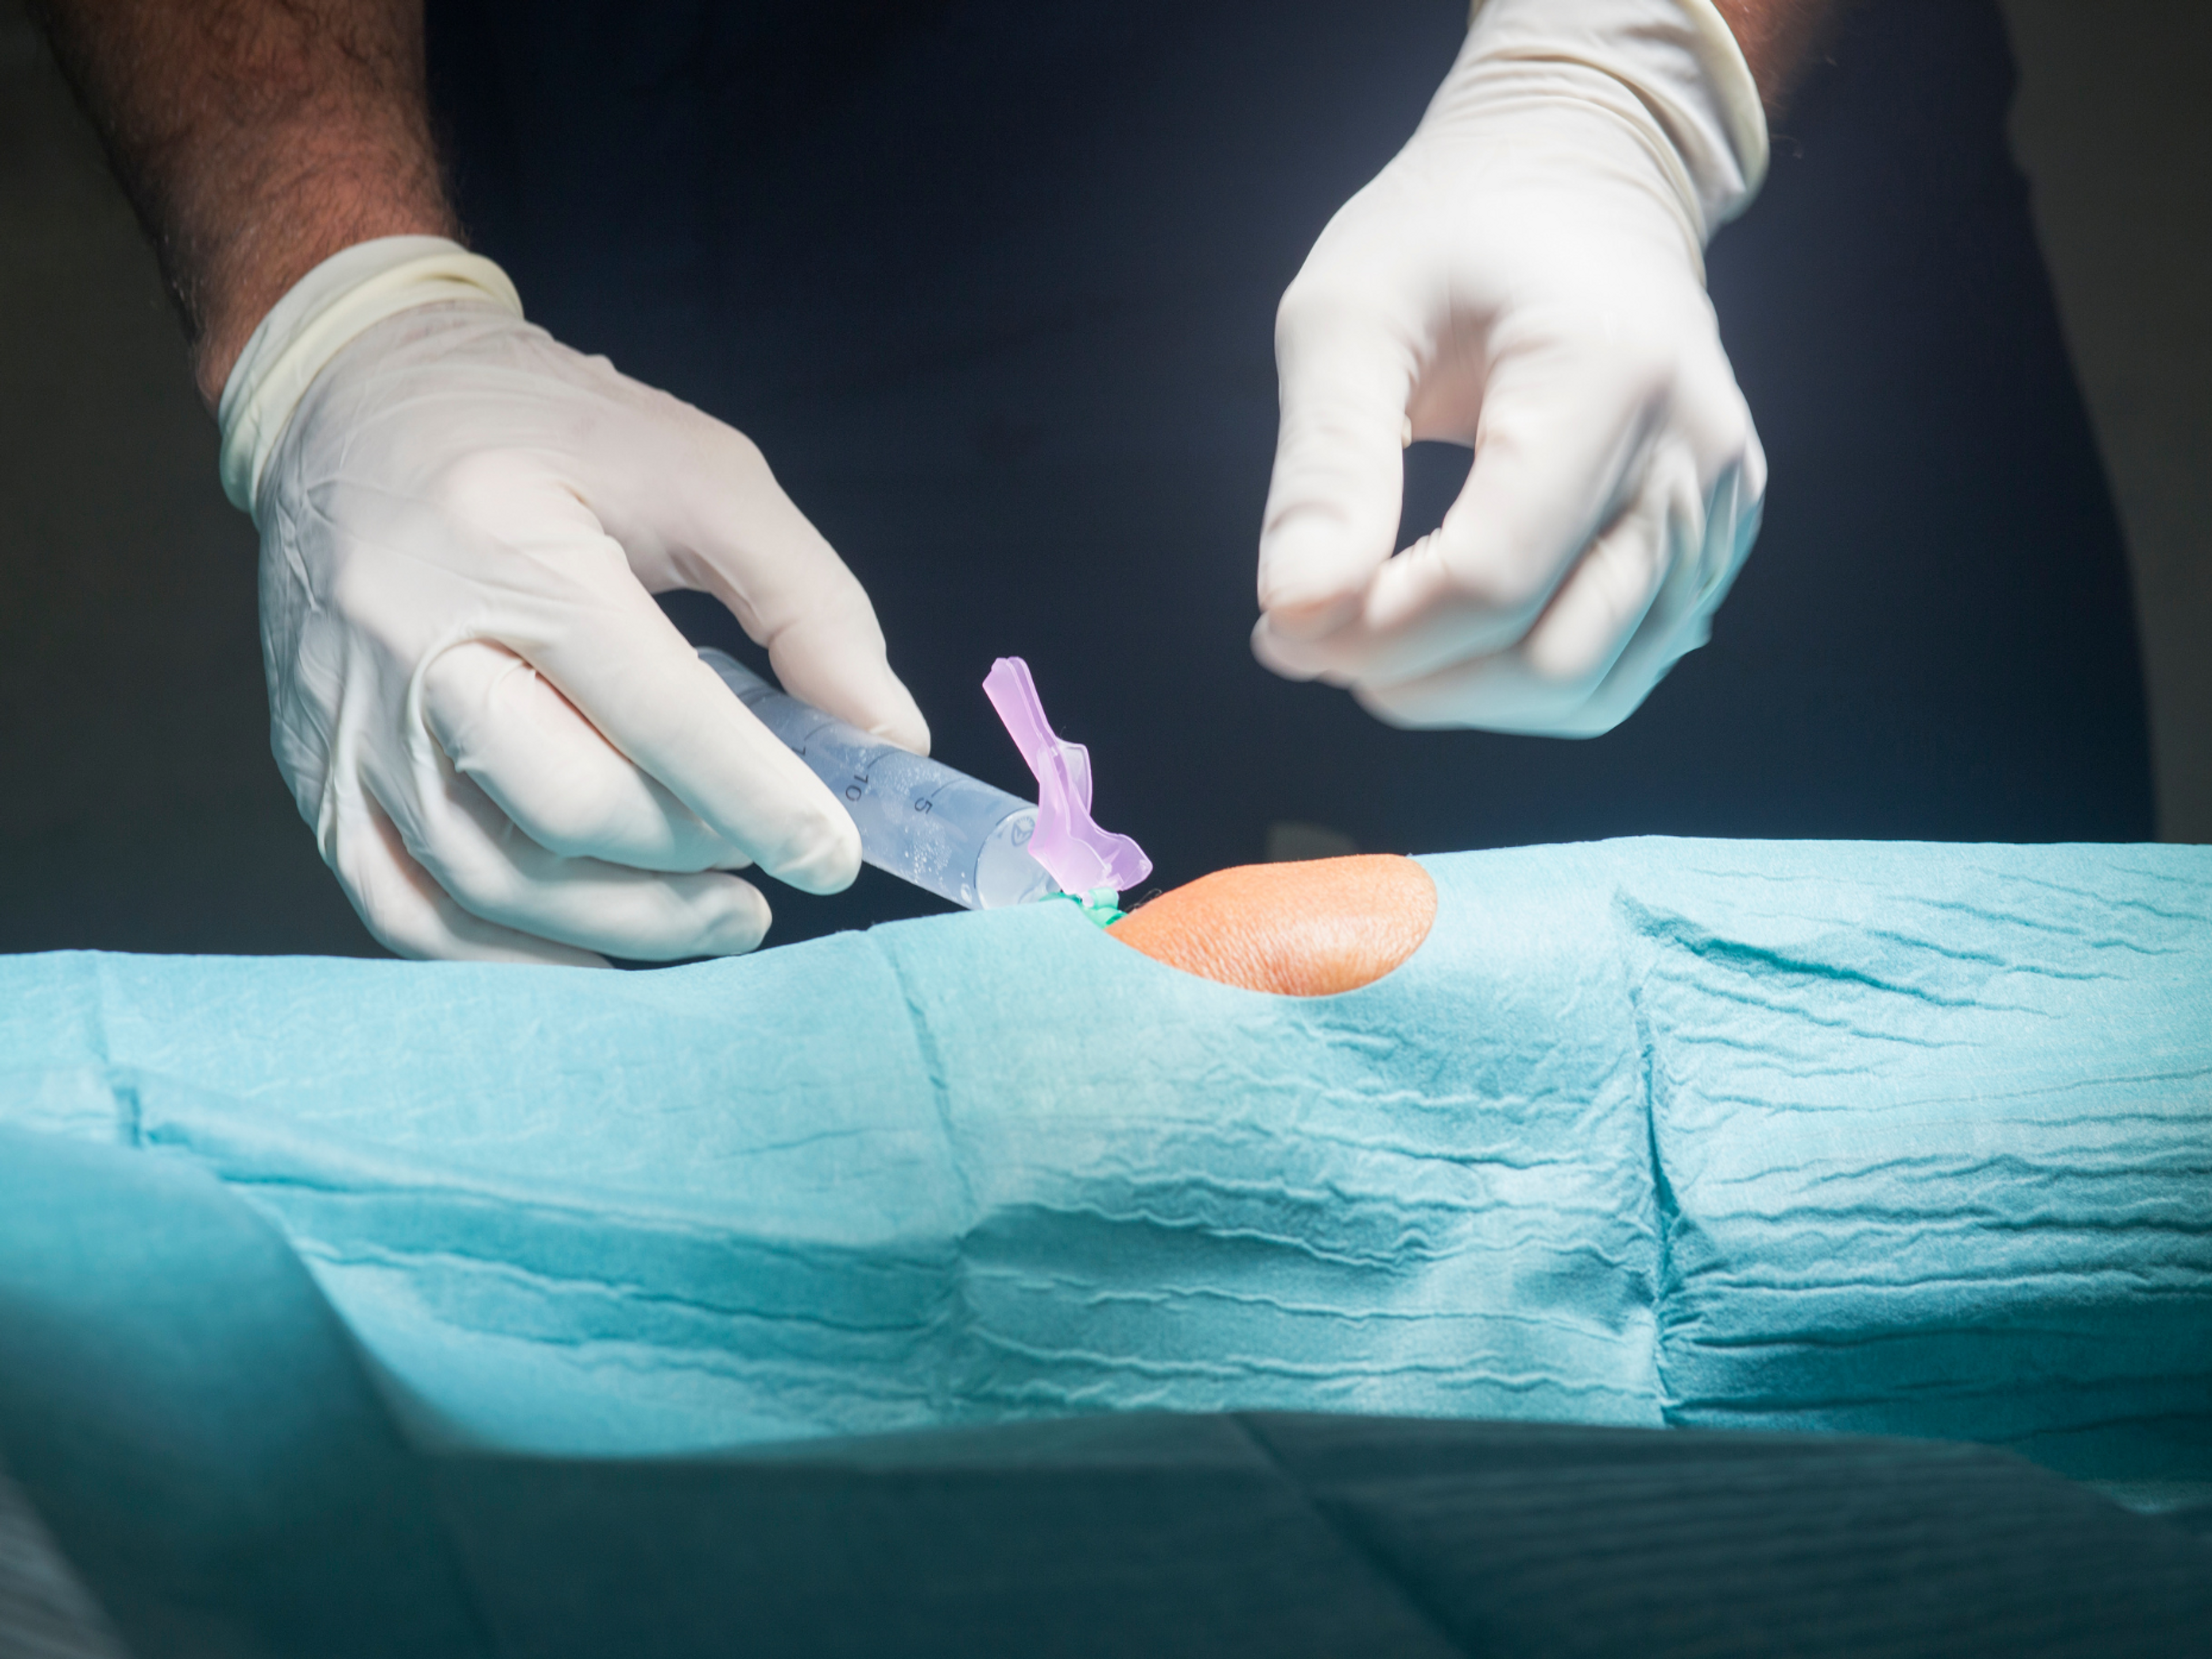 Invasive treatment options for patellar tendonitis include injections and surgery.